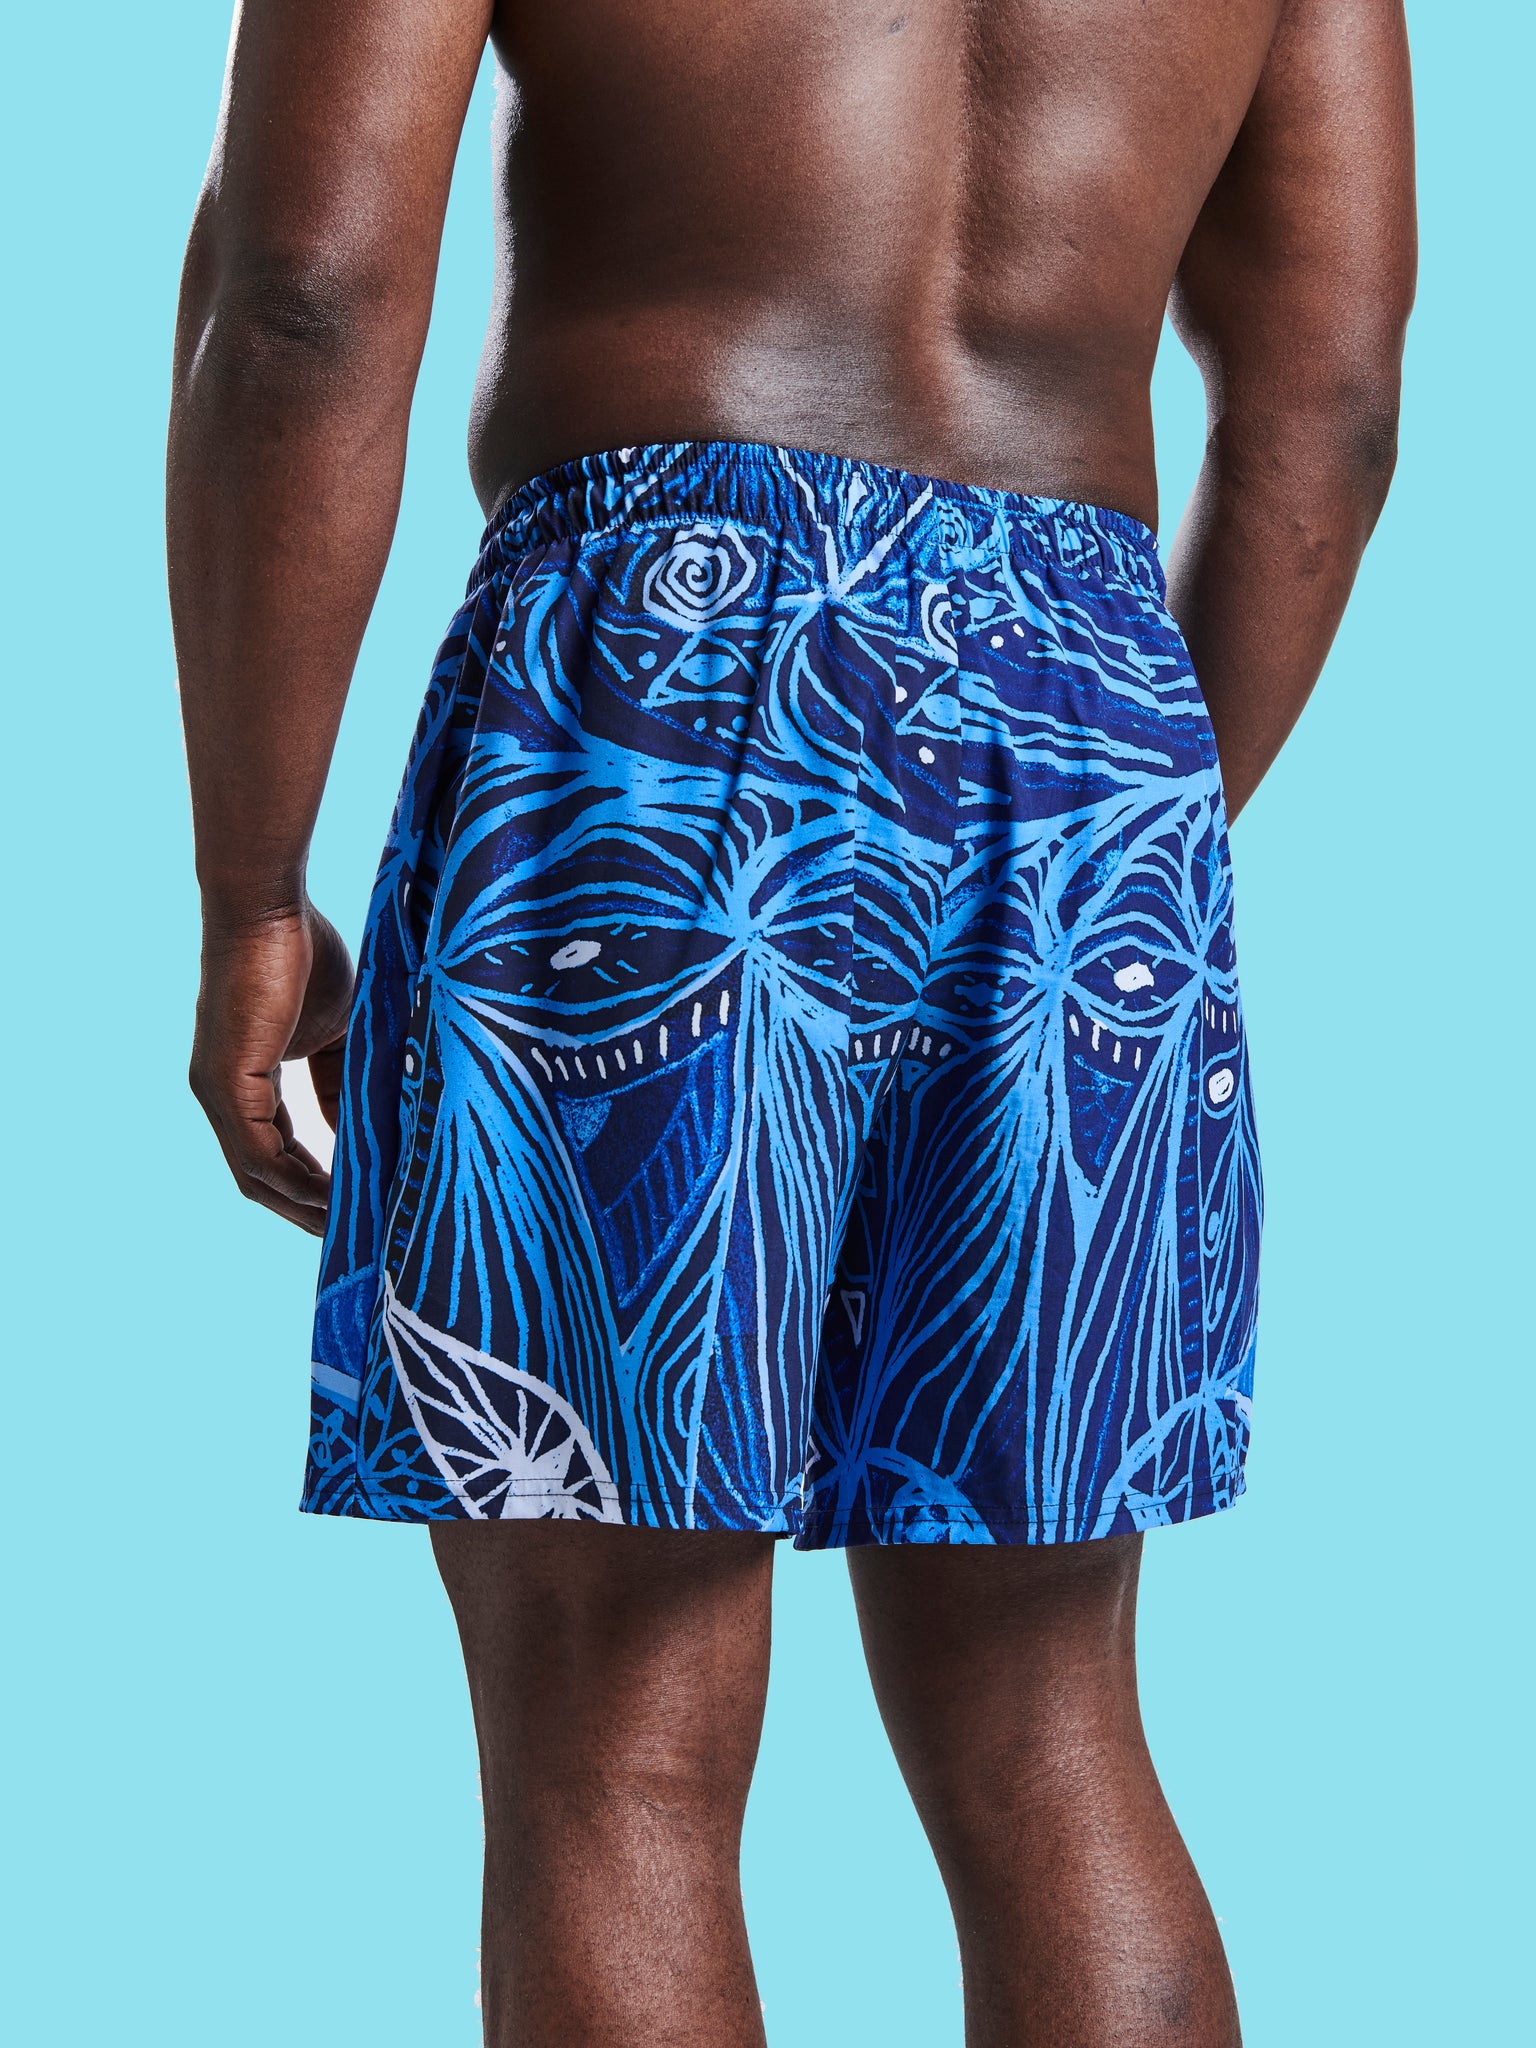 LOOK Inverted Blue - Recycled Athletic Shorts (Unisex )